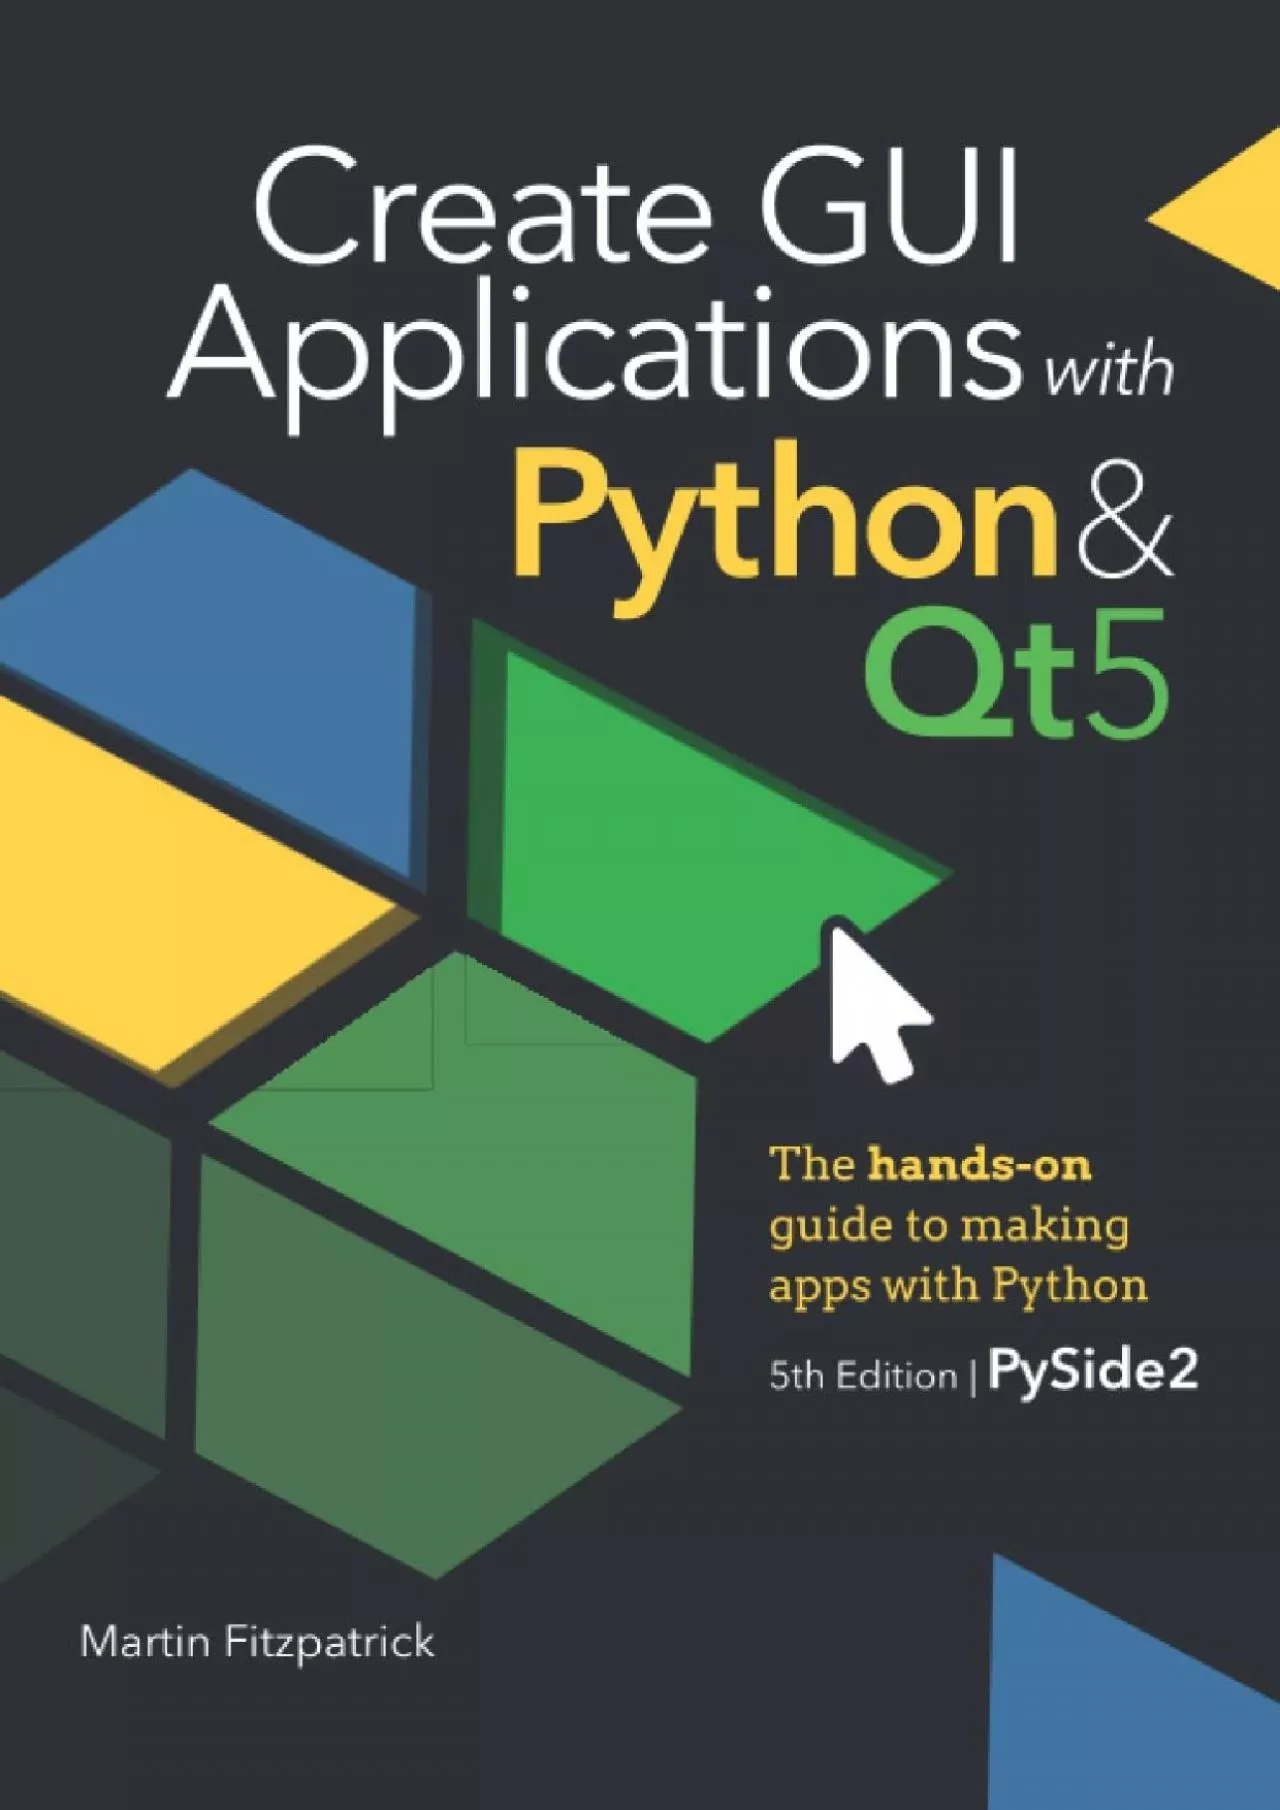 [eBOOK]-Create GUI Applications with Python & Qt5 (5th Edition, PySide2) The hands-on